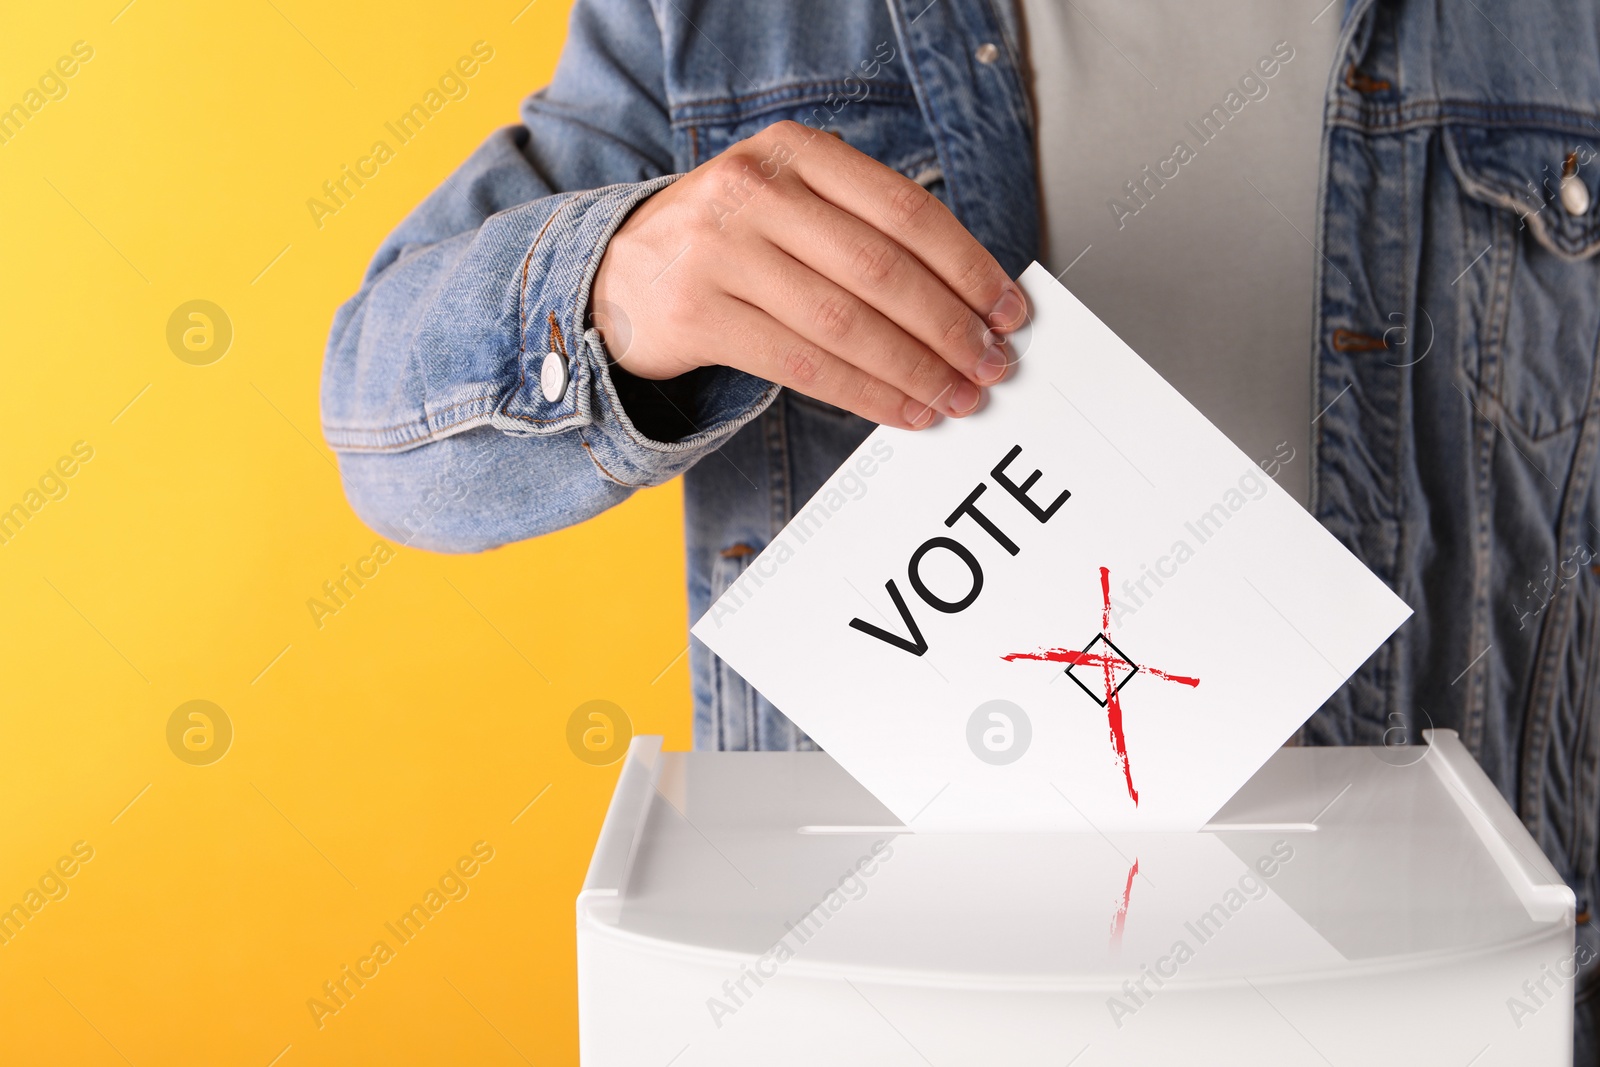 Image of Man putting paper with word Vote and tick into ballot box on yellow background